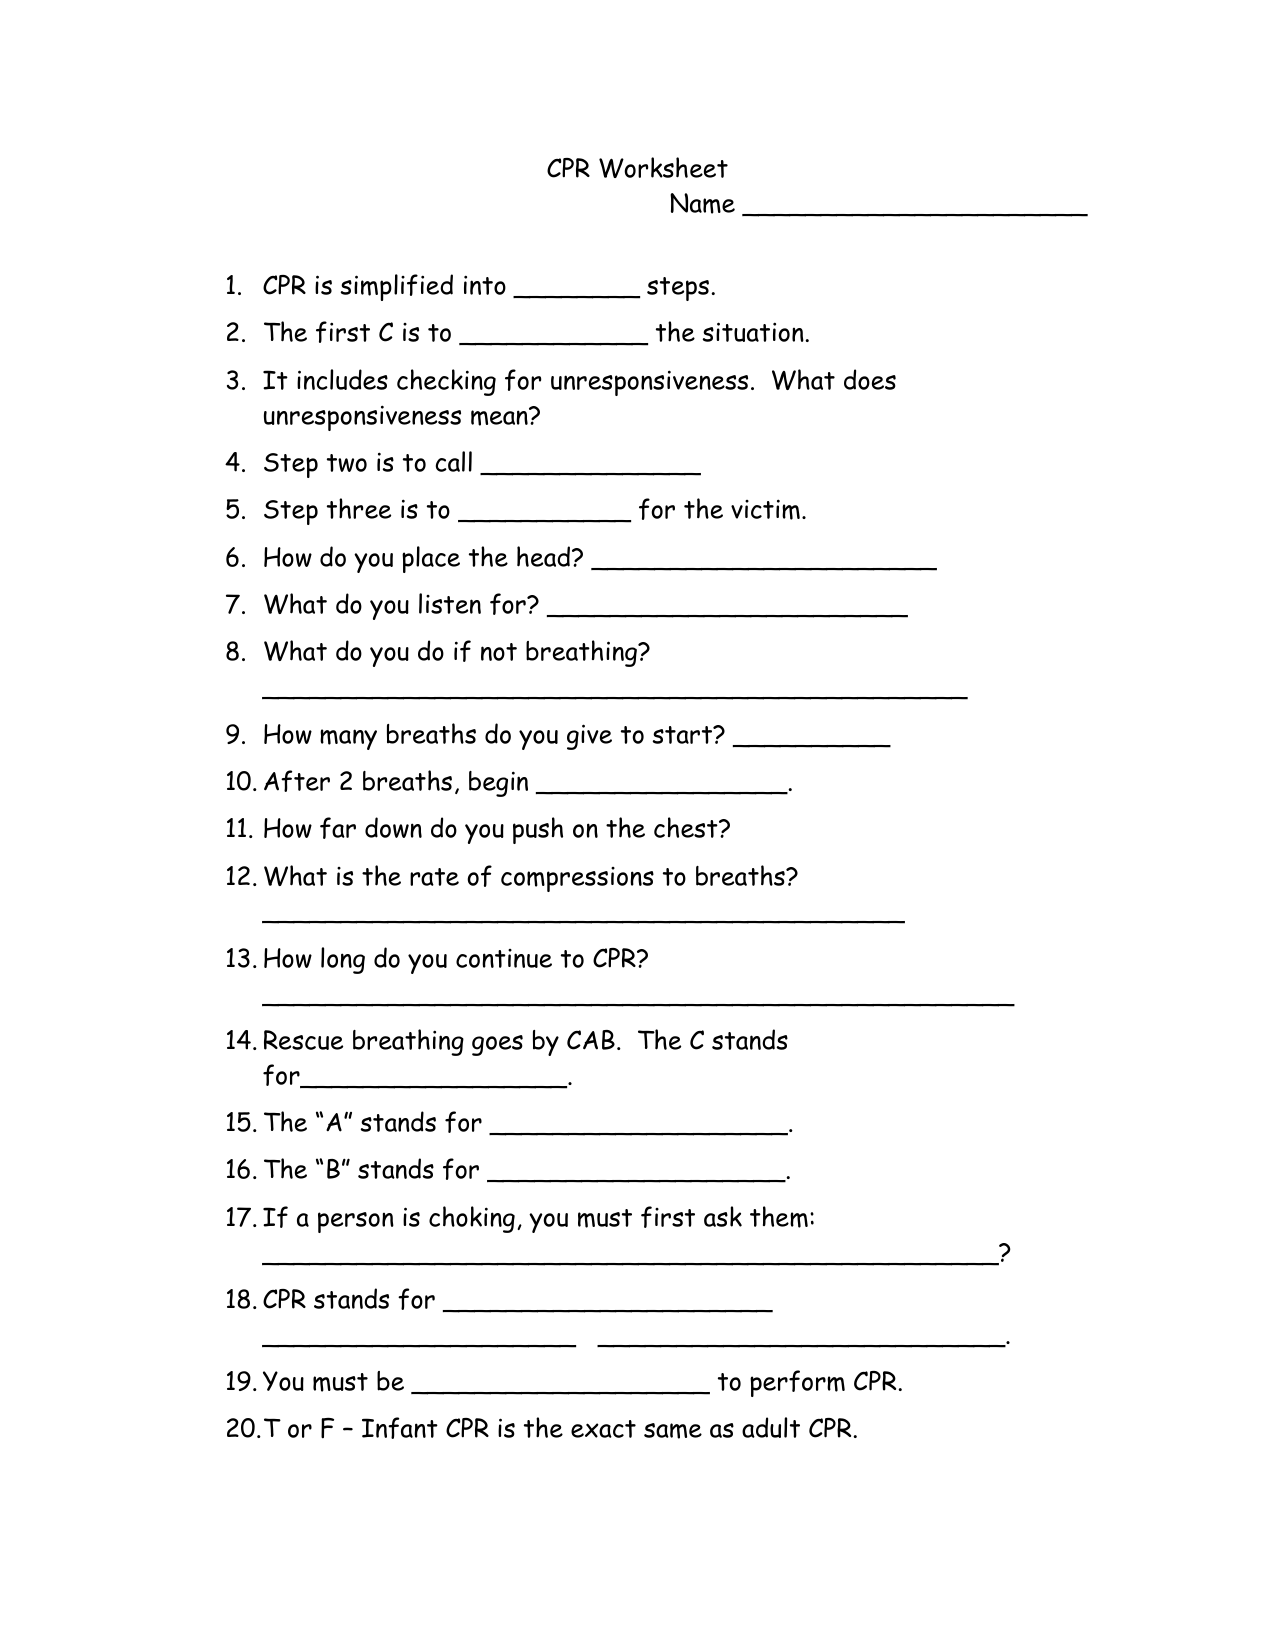 ️First Aid And Cpr Worksheet Free Download Goodimg co